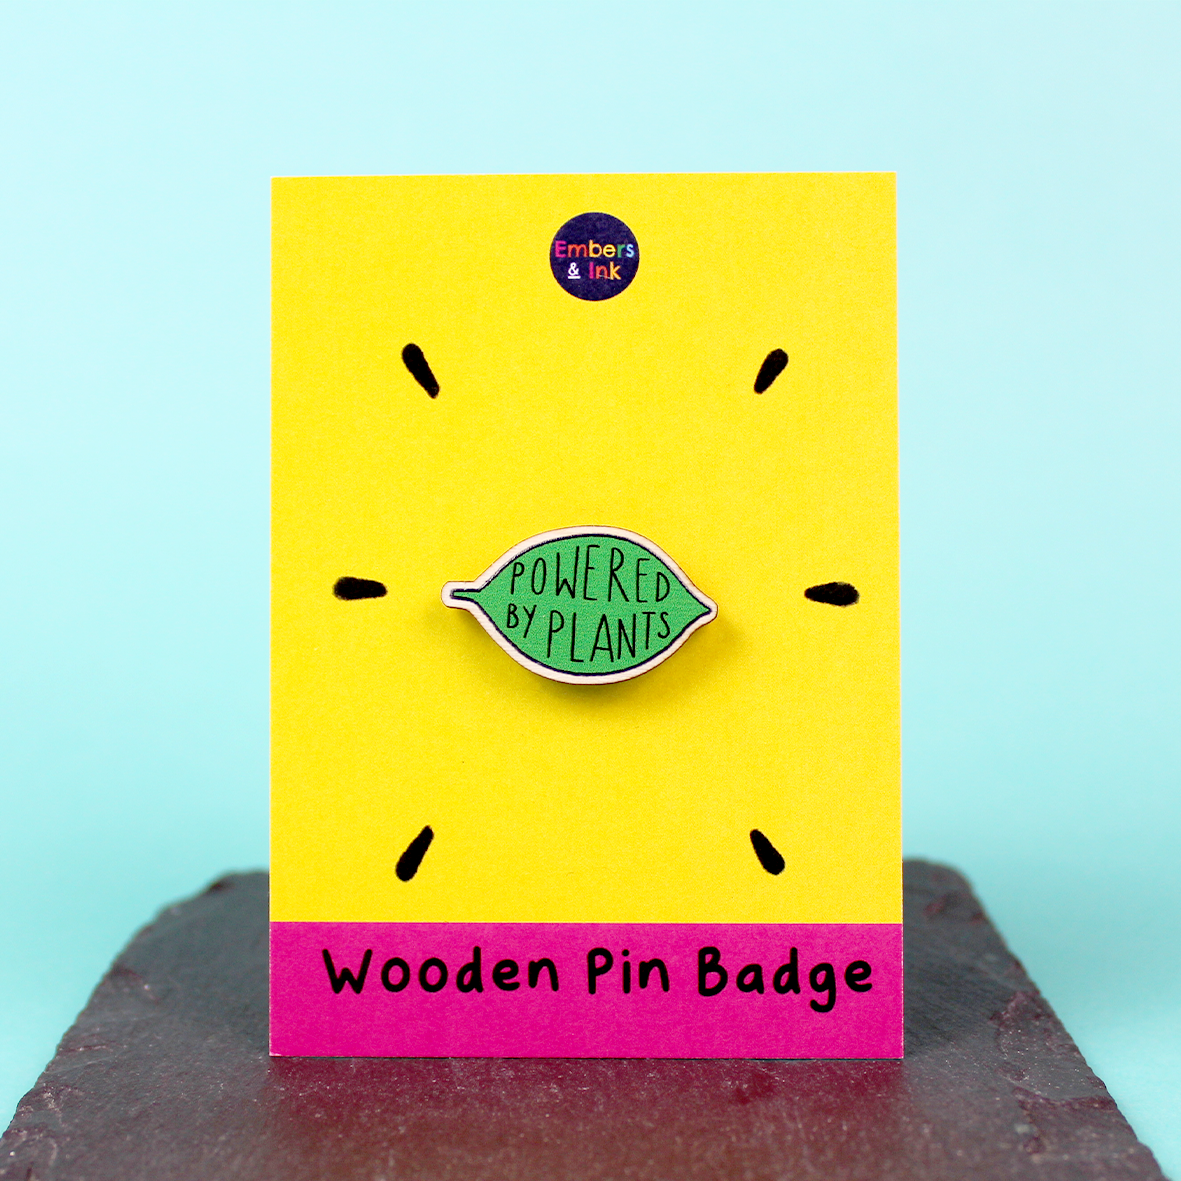 Powered by Plants Wooden Pin Badge